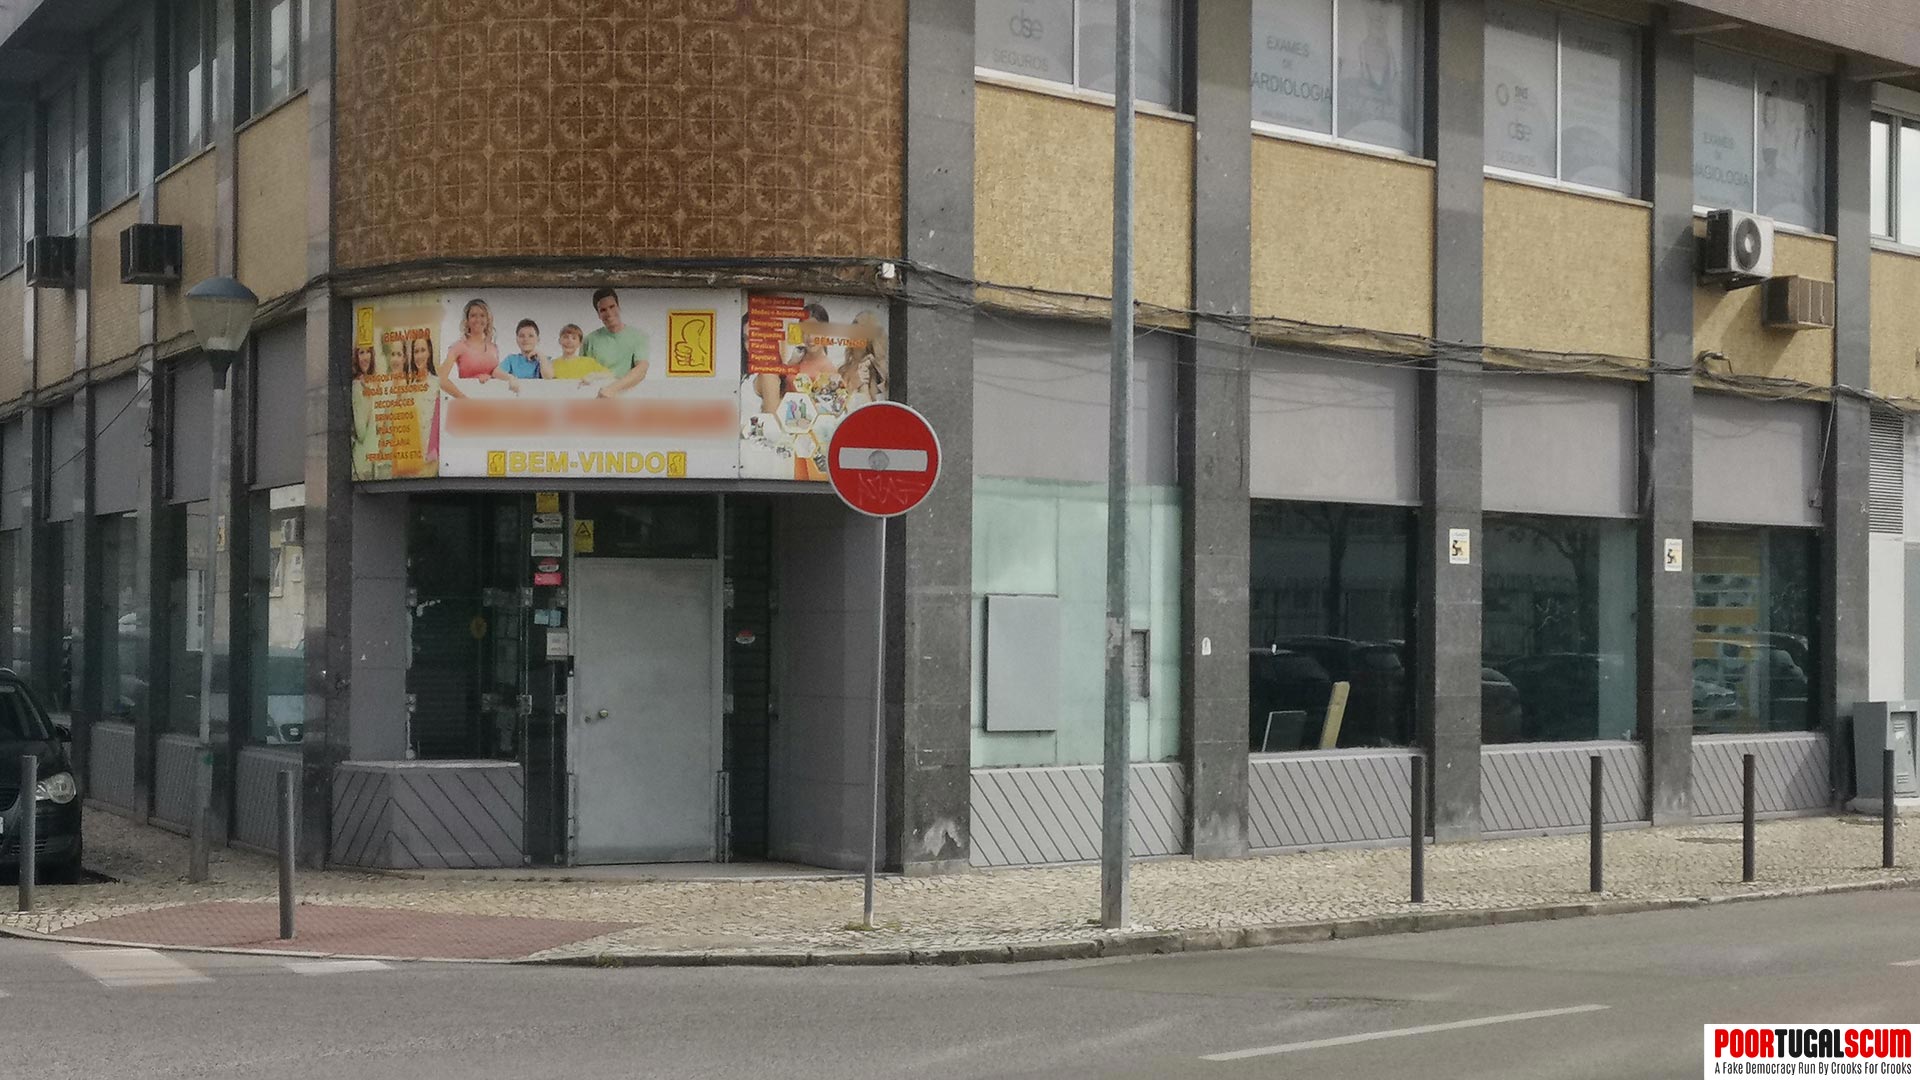 Chinese shop in Portugal bankrupt